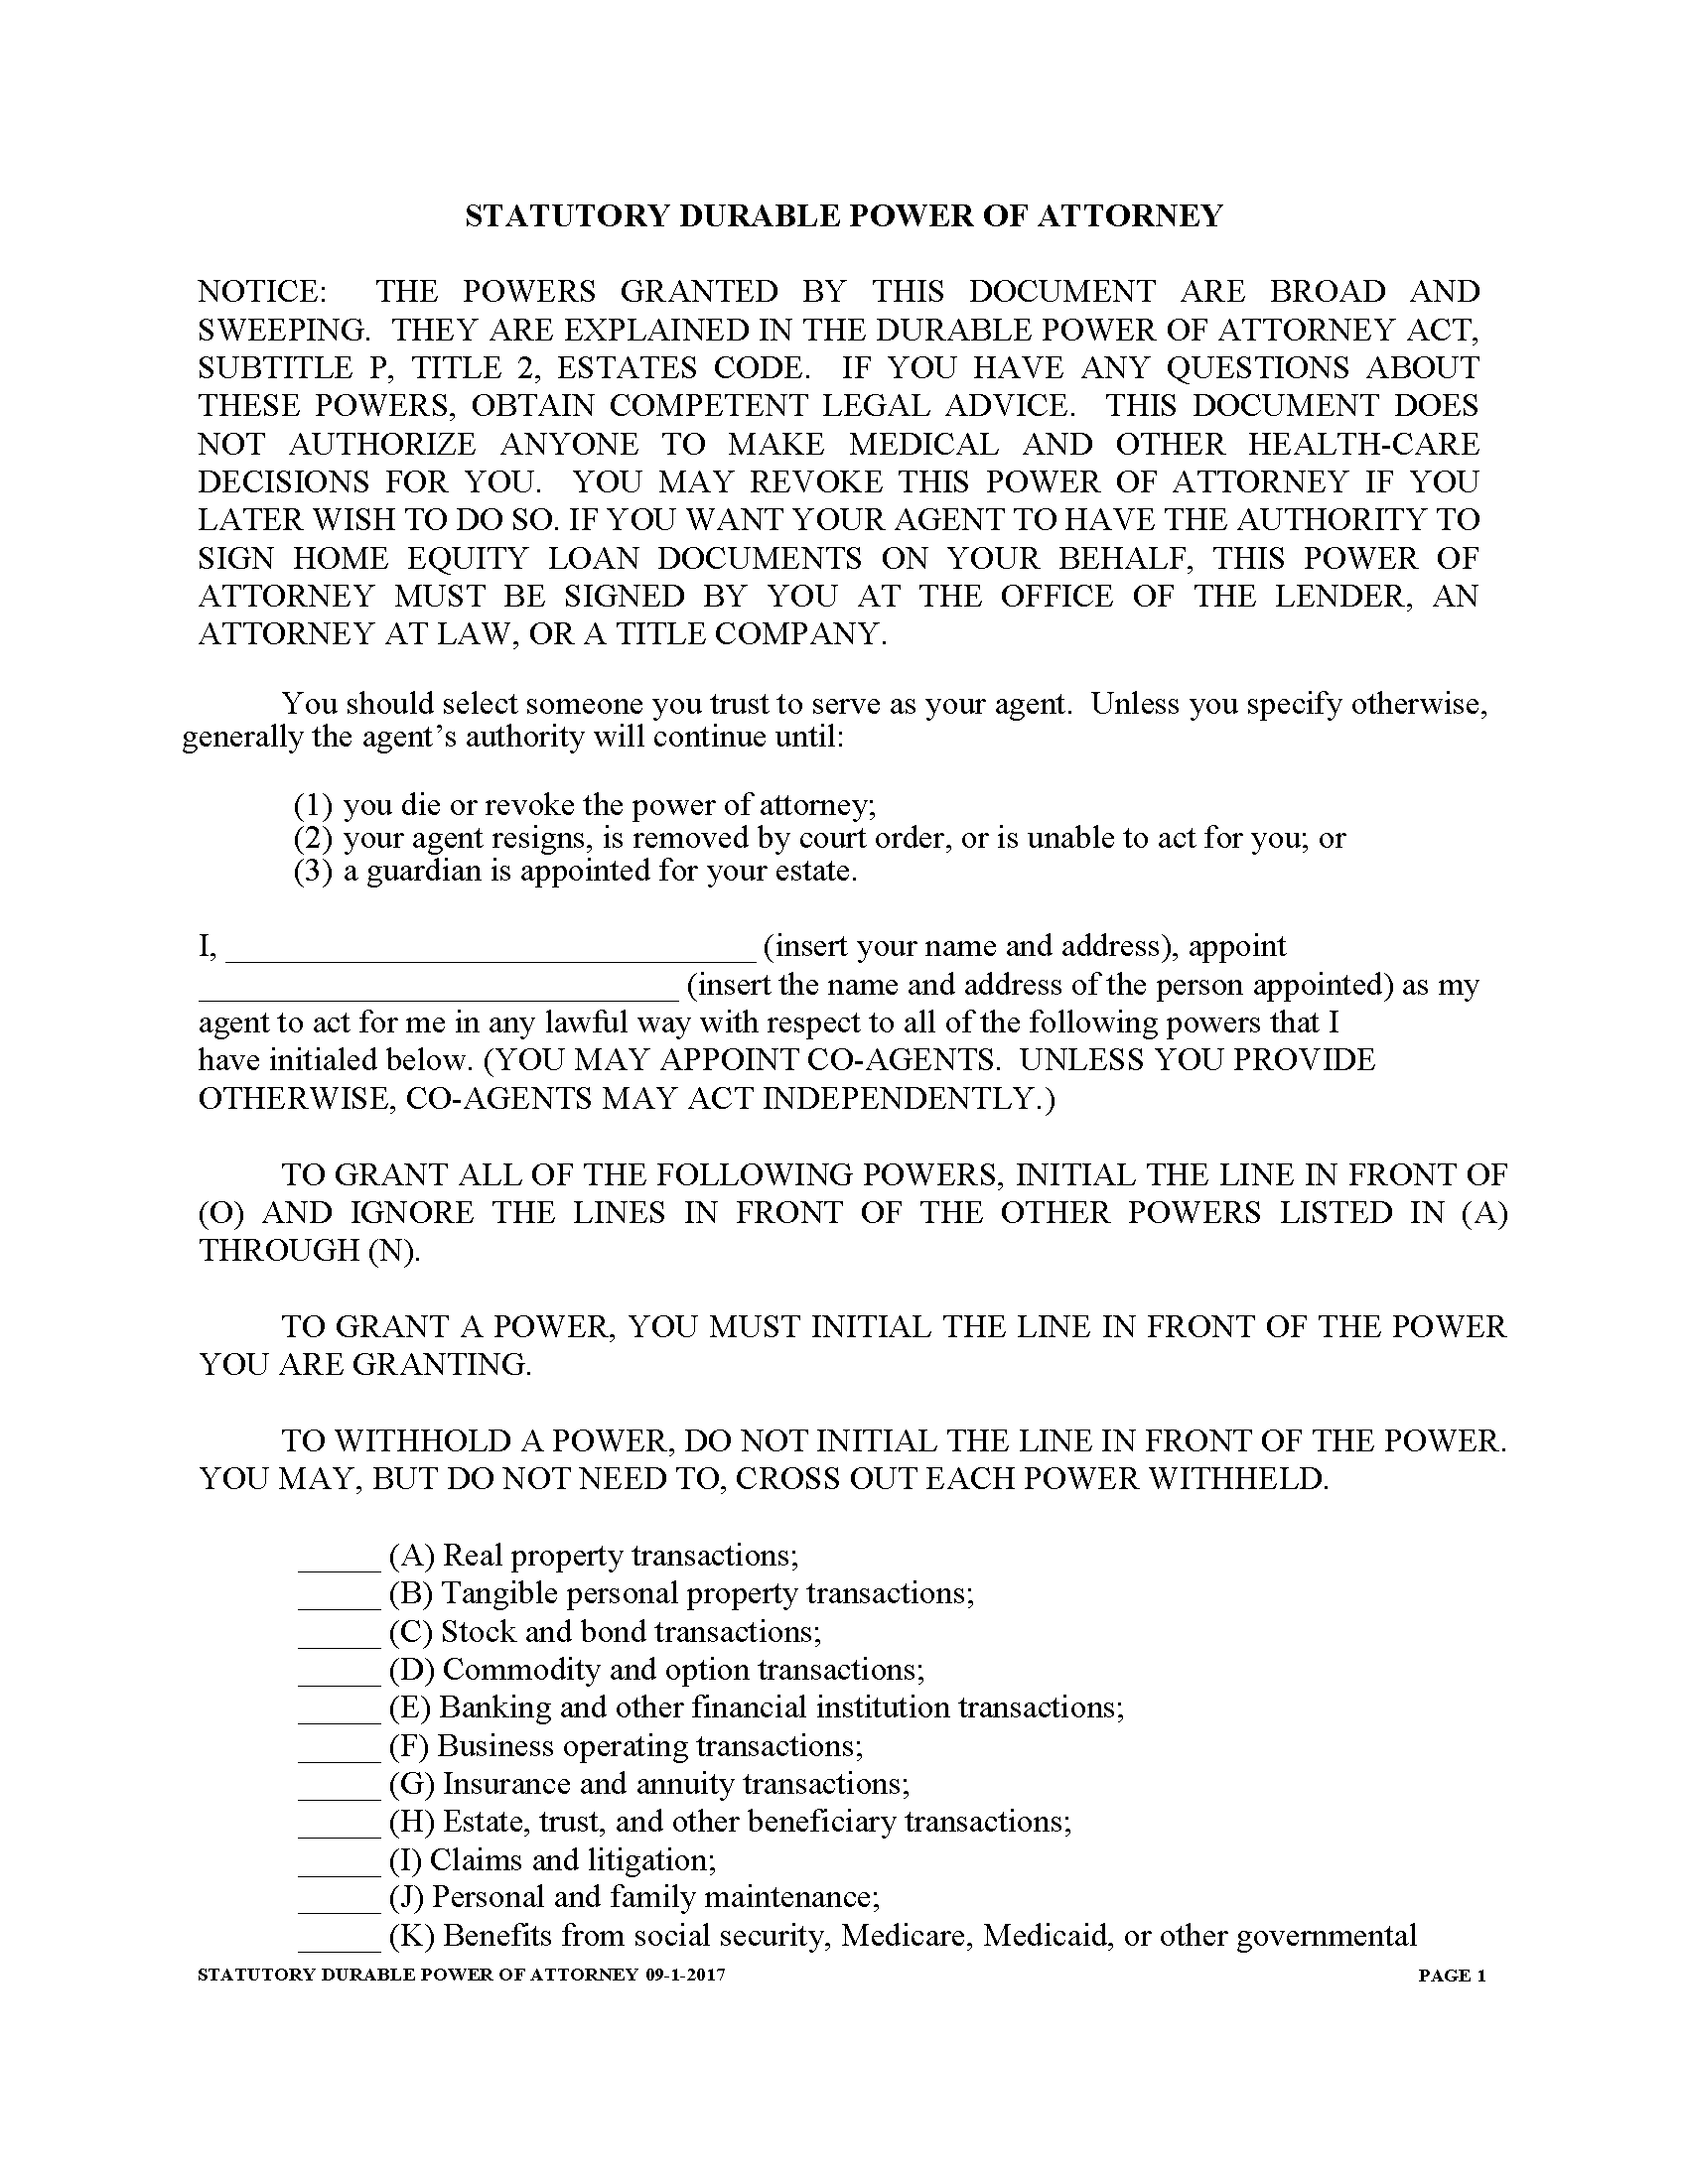 texas-durable-power-of-attorney-form-fillable-pdf-free-printable